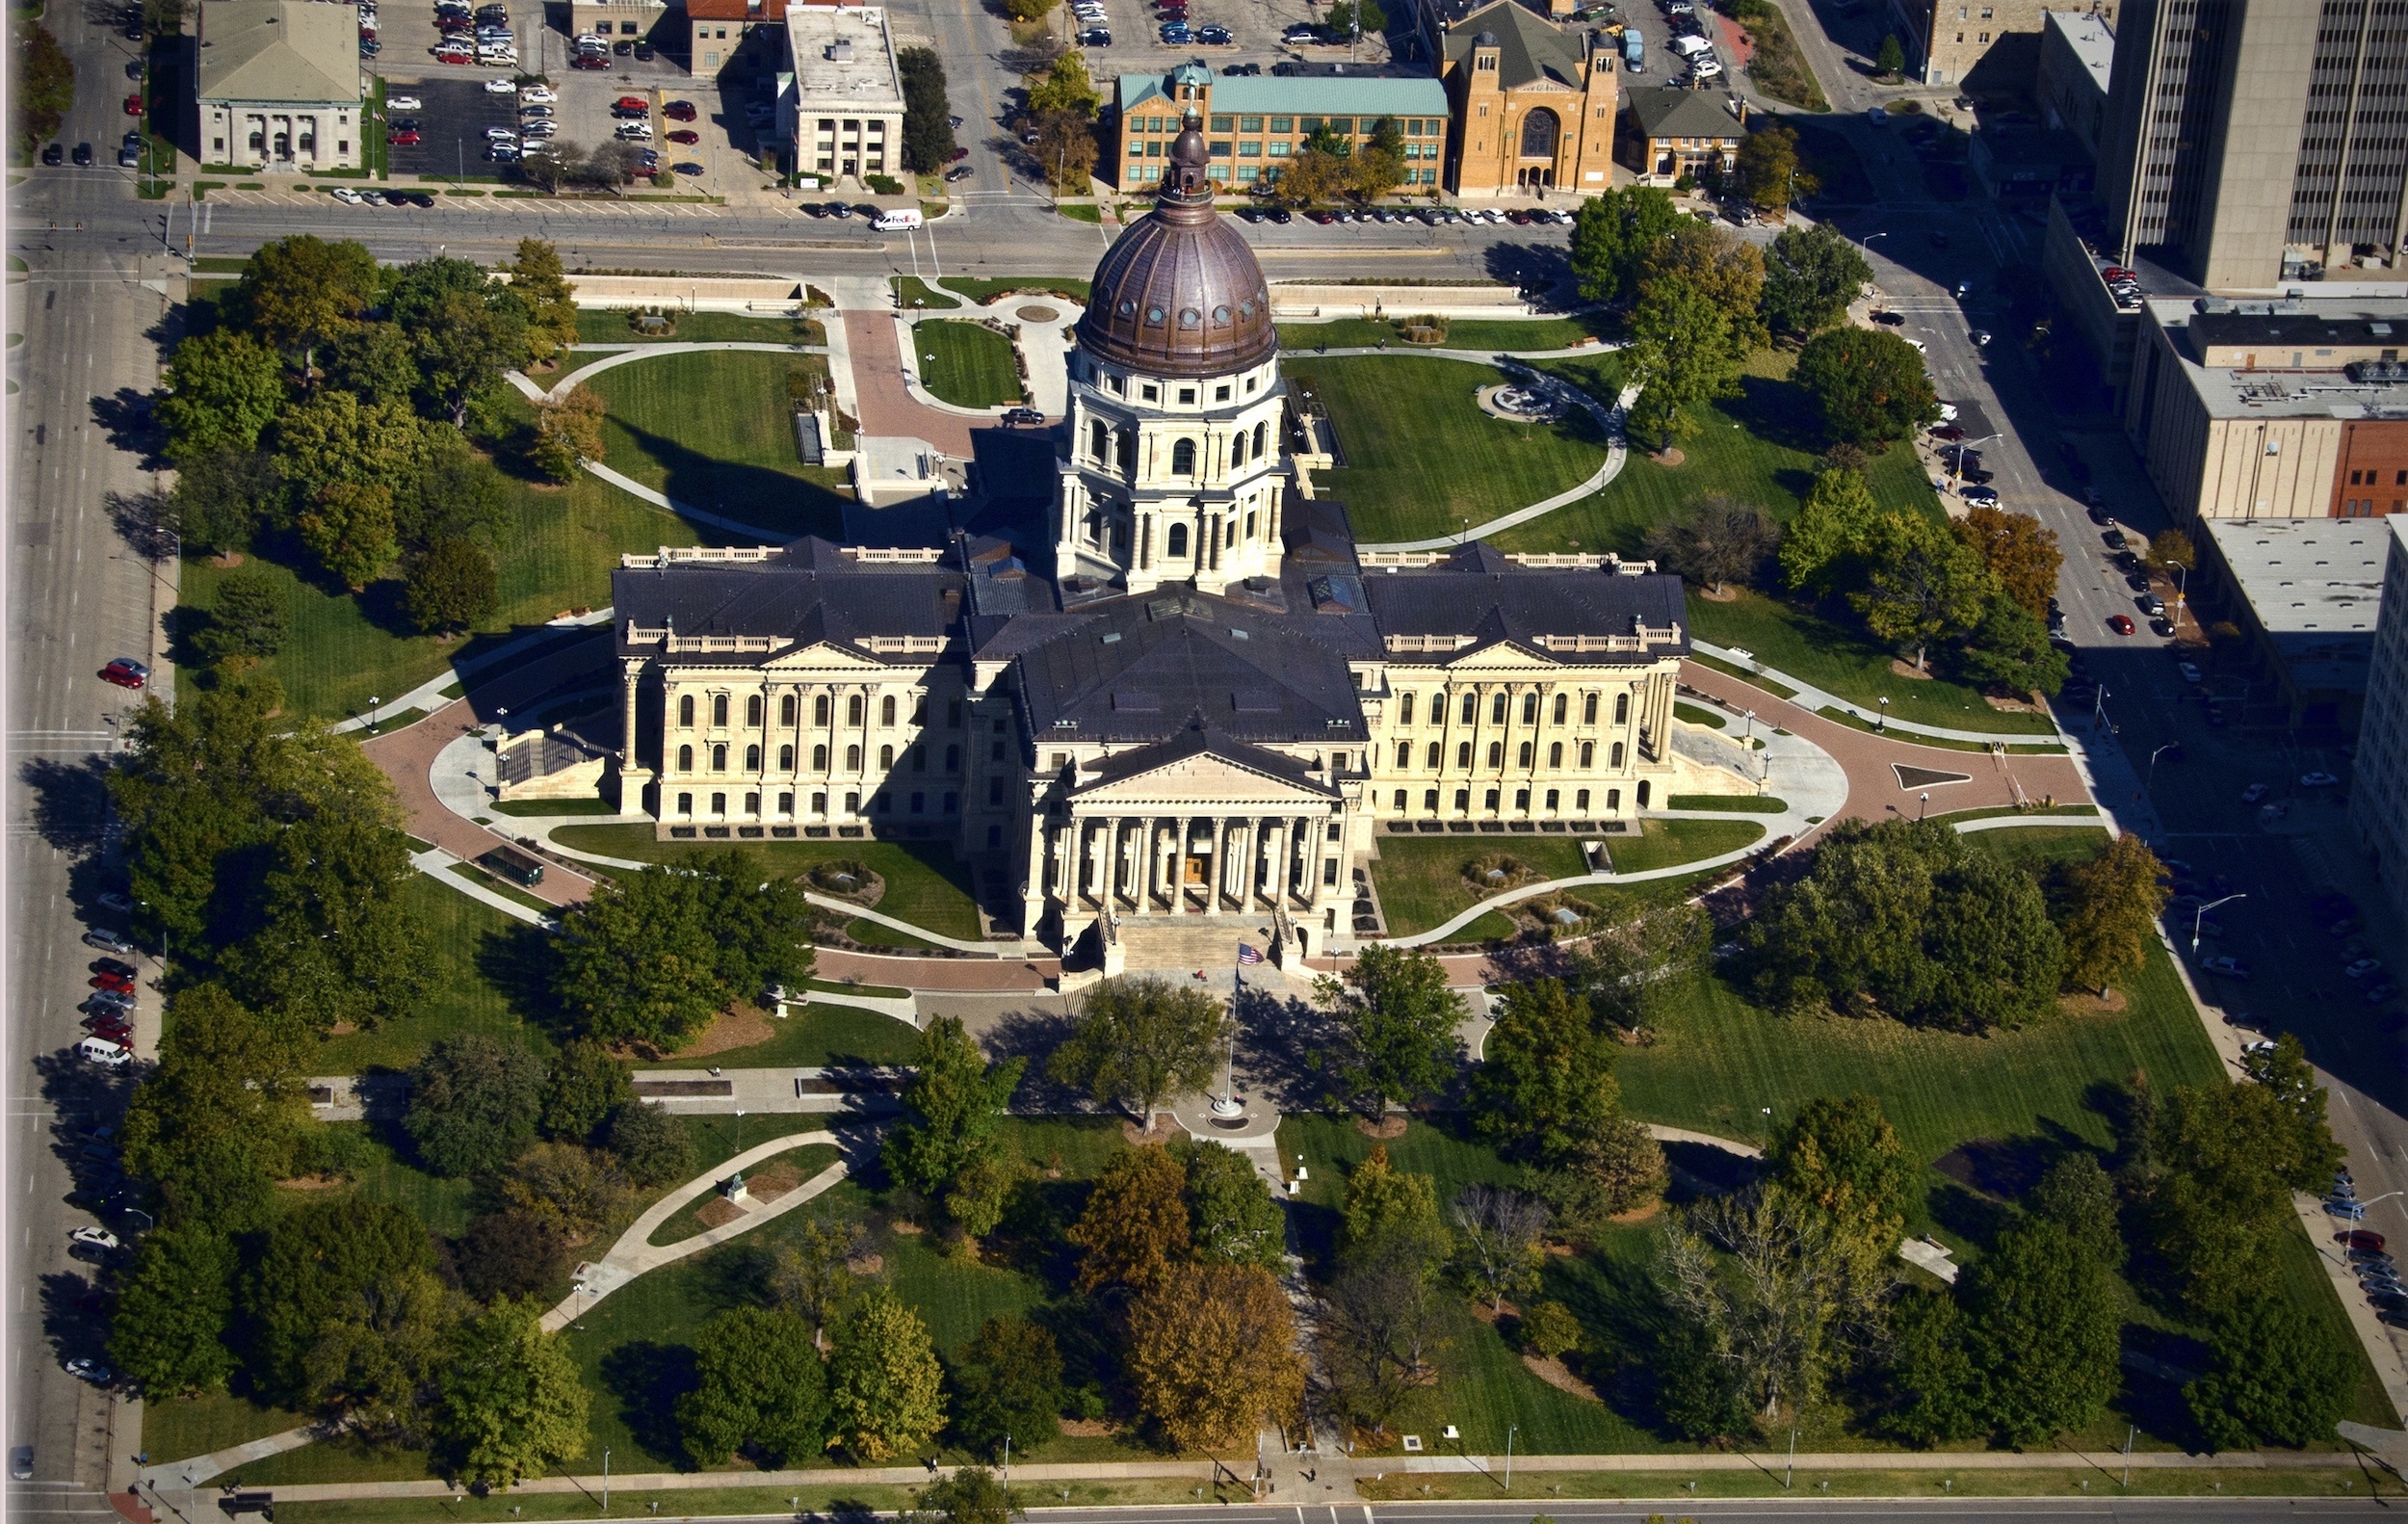 Topeka, Travels, Moving to, Reasons why, 2500x1590 HD Desktop